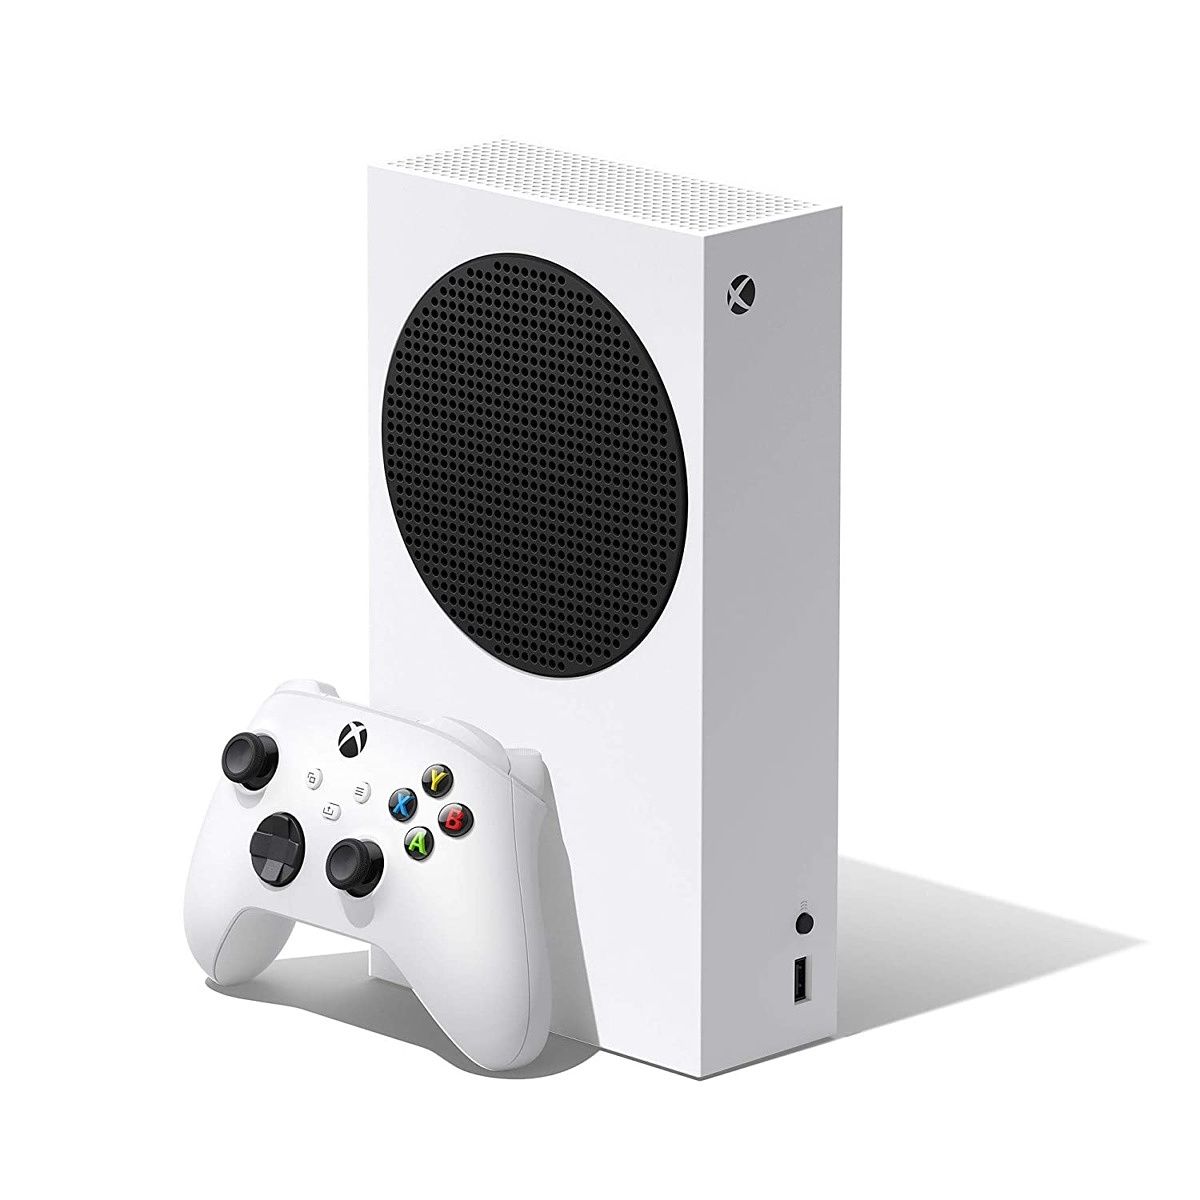 Microsoft's cheapest new-generation console brings many of the benefits of the Series X to the table in a smaller, more affordable package.